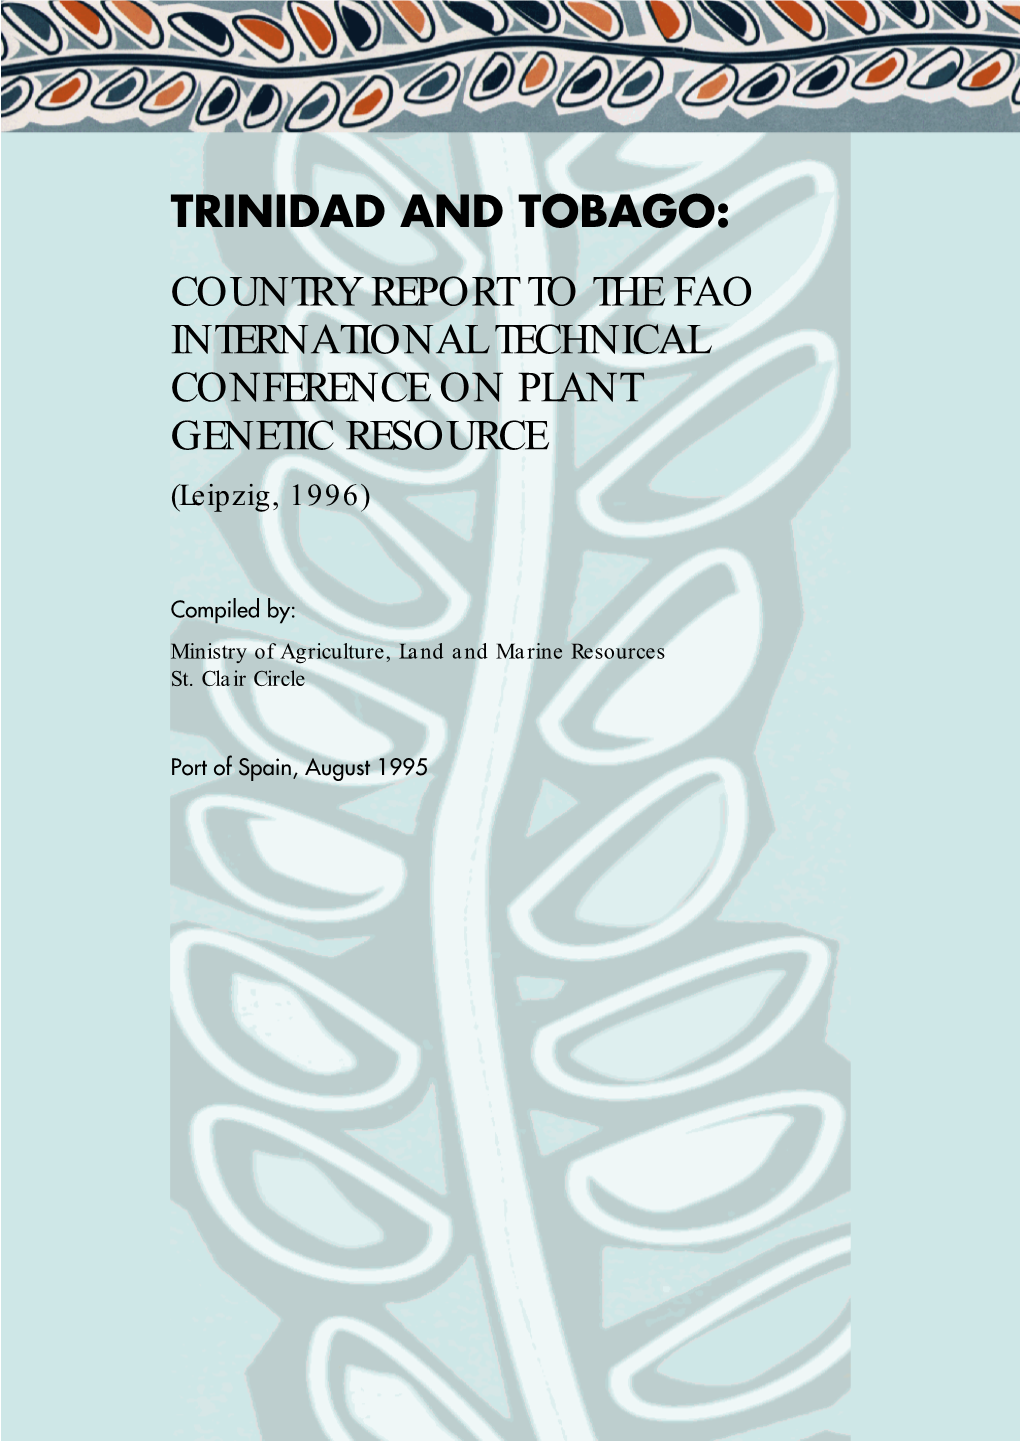 TRINIDAD and TOBAGO: COUNTRY REPORT to the FAO INTERNATIONAL TECHNICAL CONFERENCE on PLANT GENETIC RESOURCE (Leipzig, 1996)